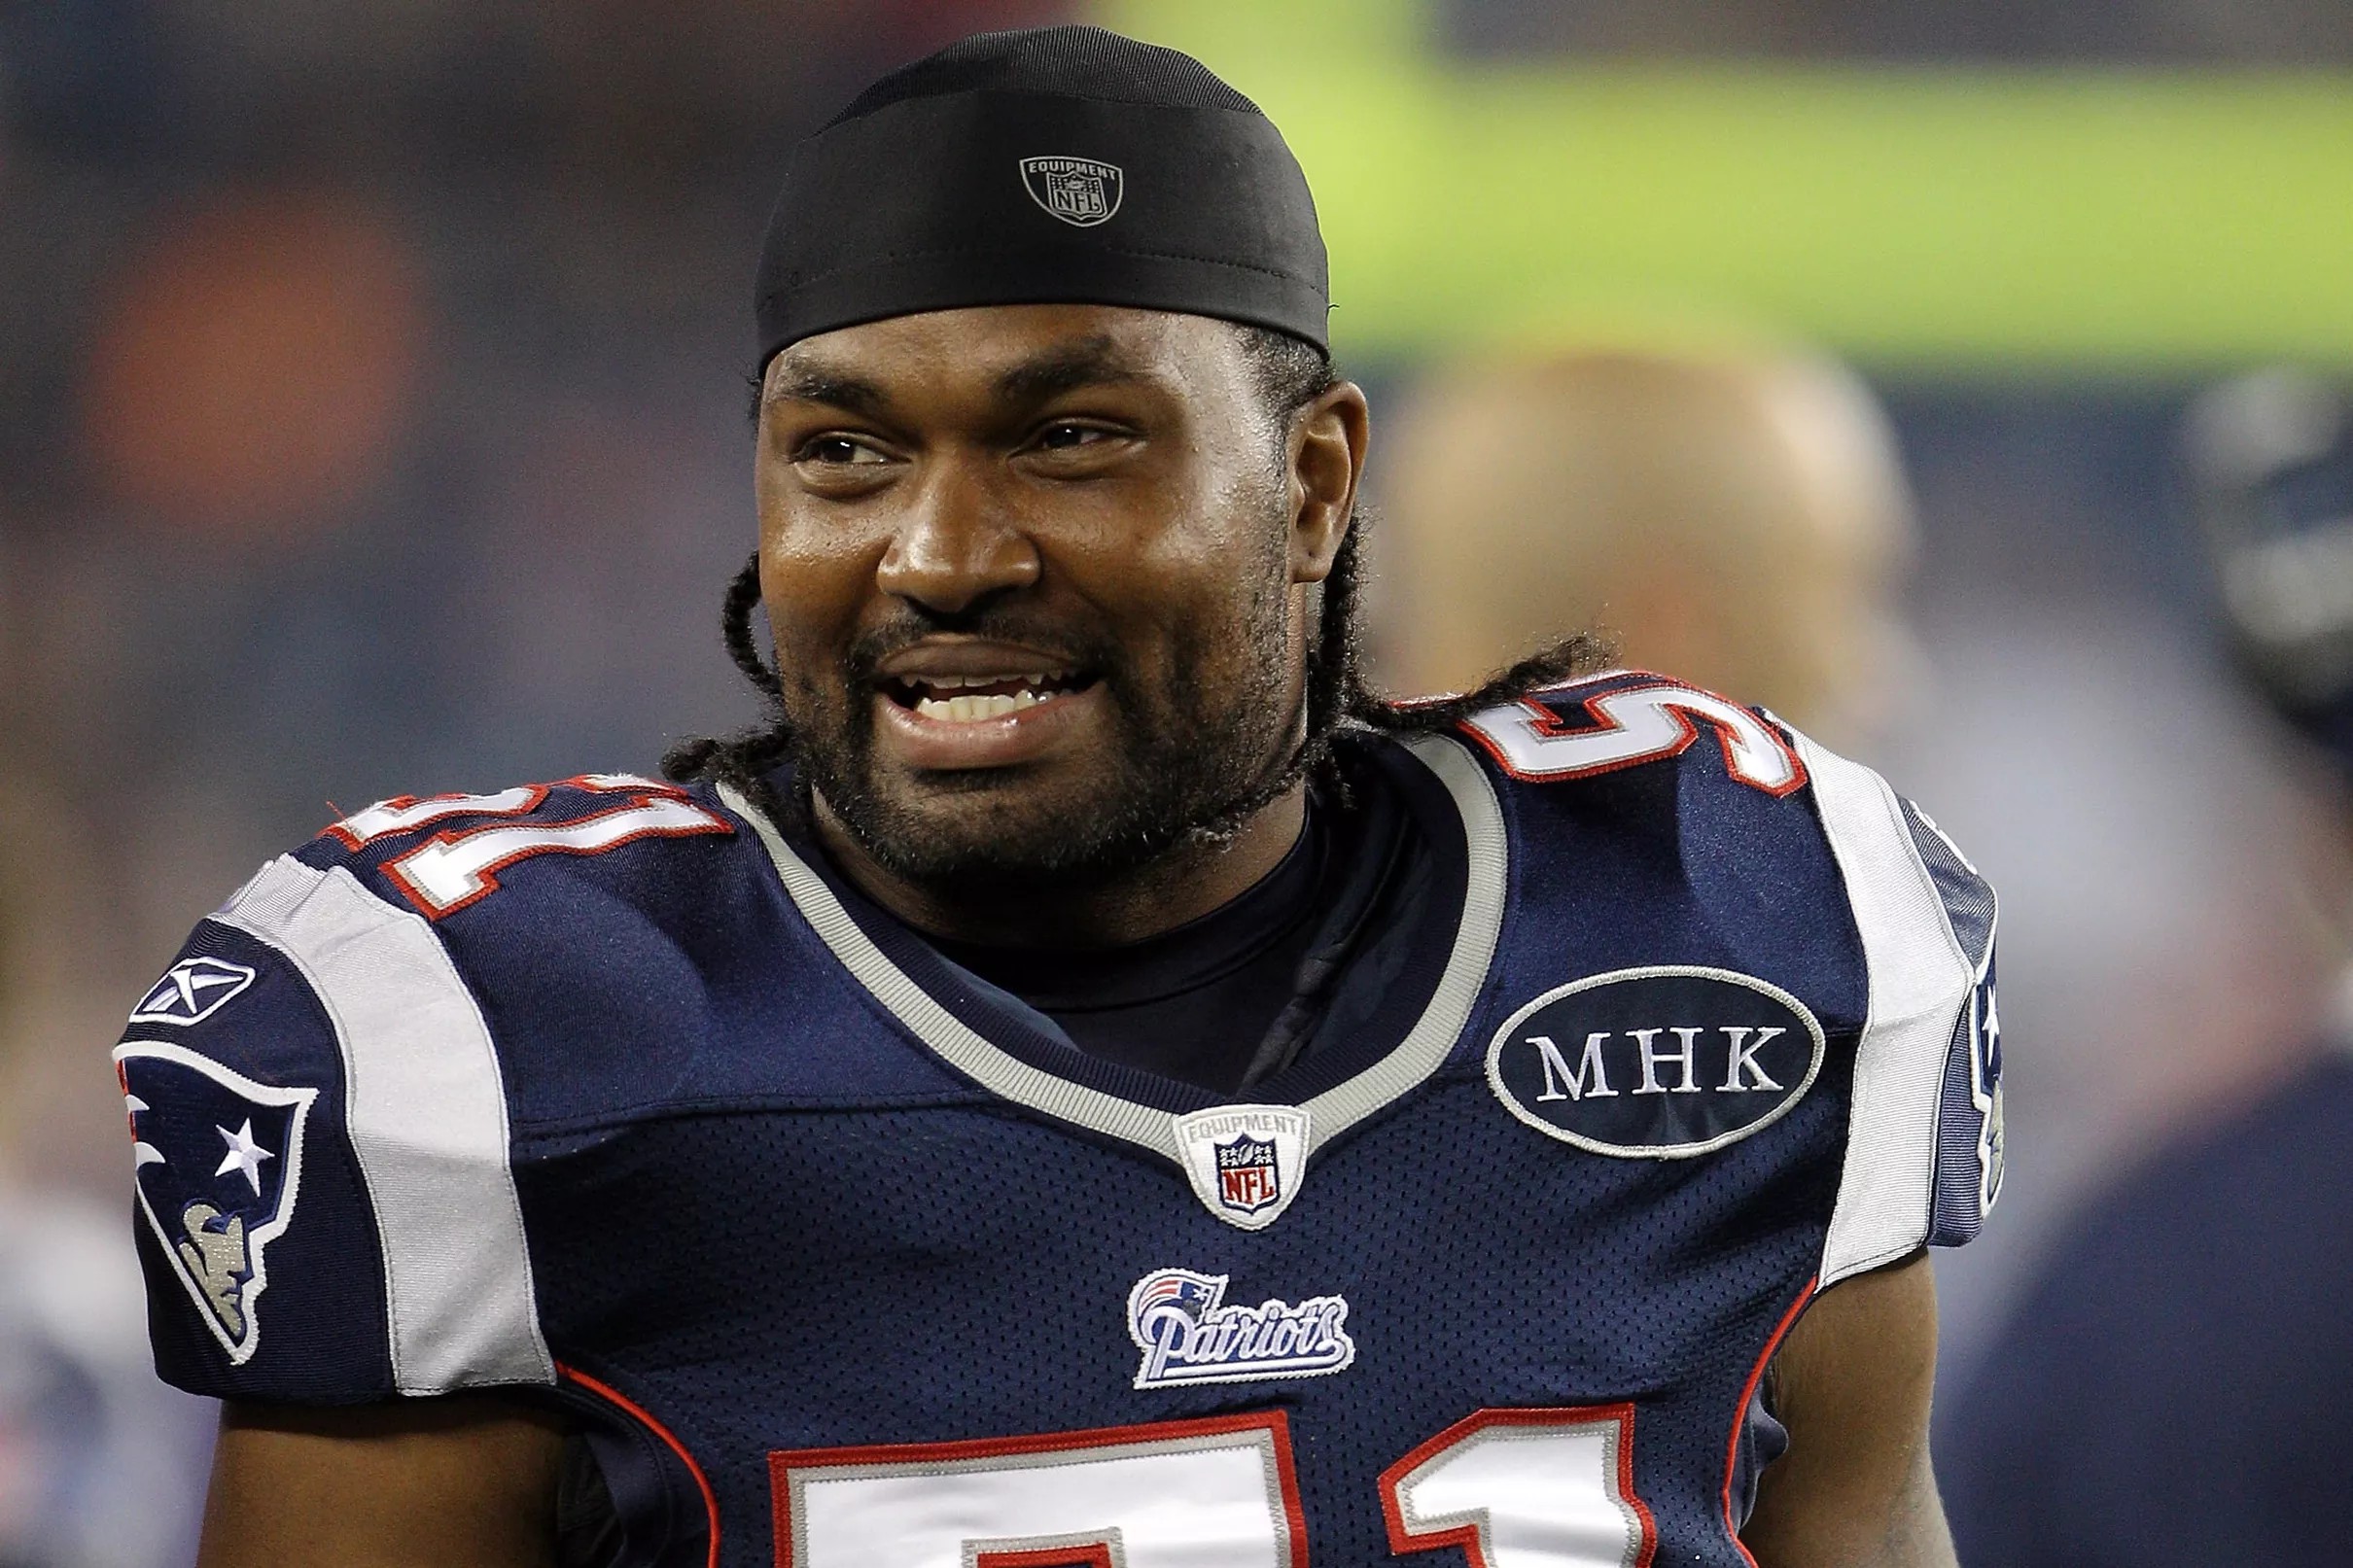 Jerod Mayo the coach was his entire career in the making